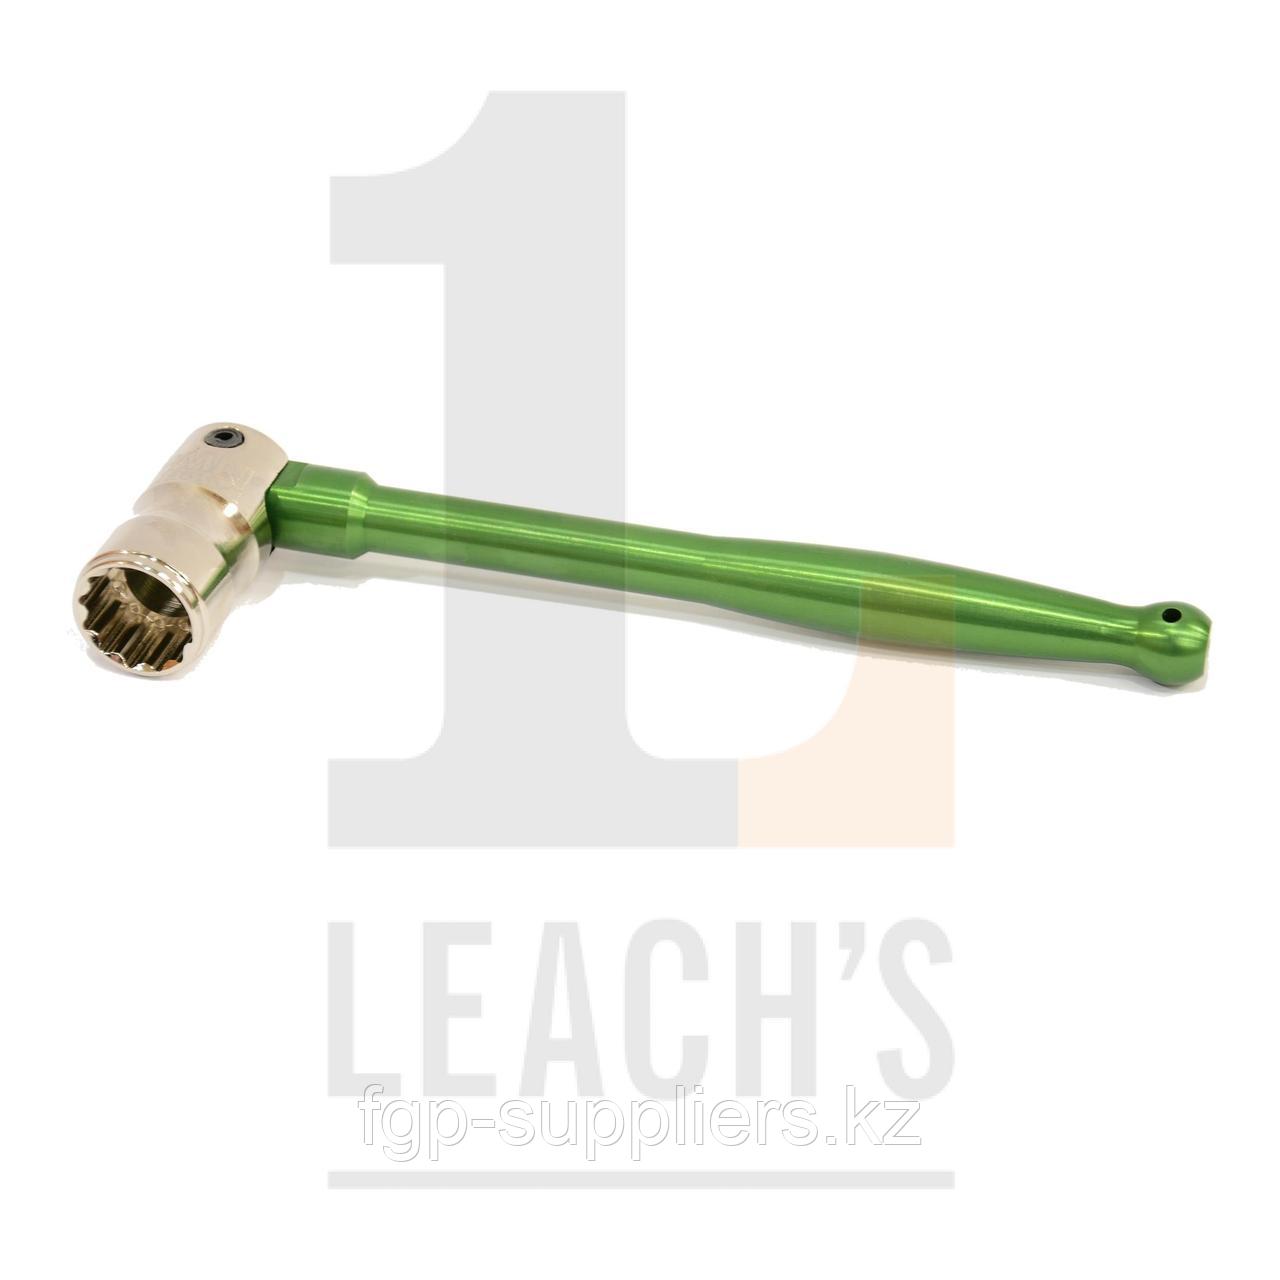 Coloured Whippet Spanner - 7/16" Leach's IMN Bi-Hex Steel Pinched Box with A.Alloy Racing Green Handle / Цветной торцовый гаечный ключ 7/16 - фото 1 - id-p65537654